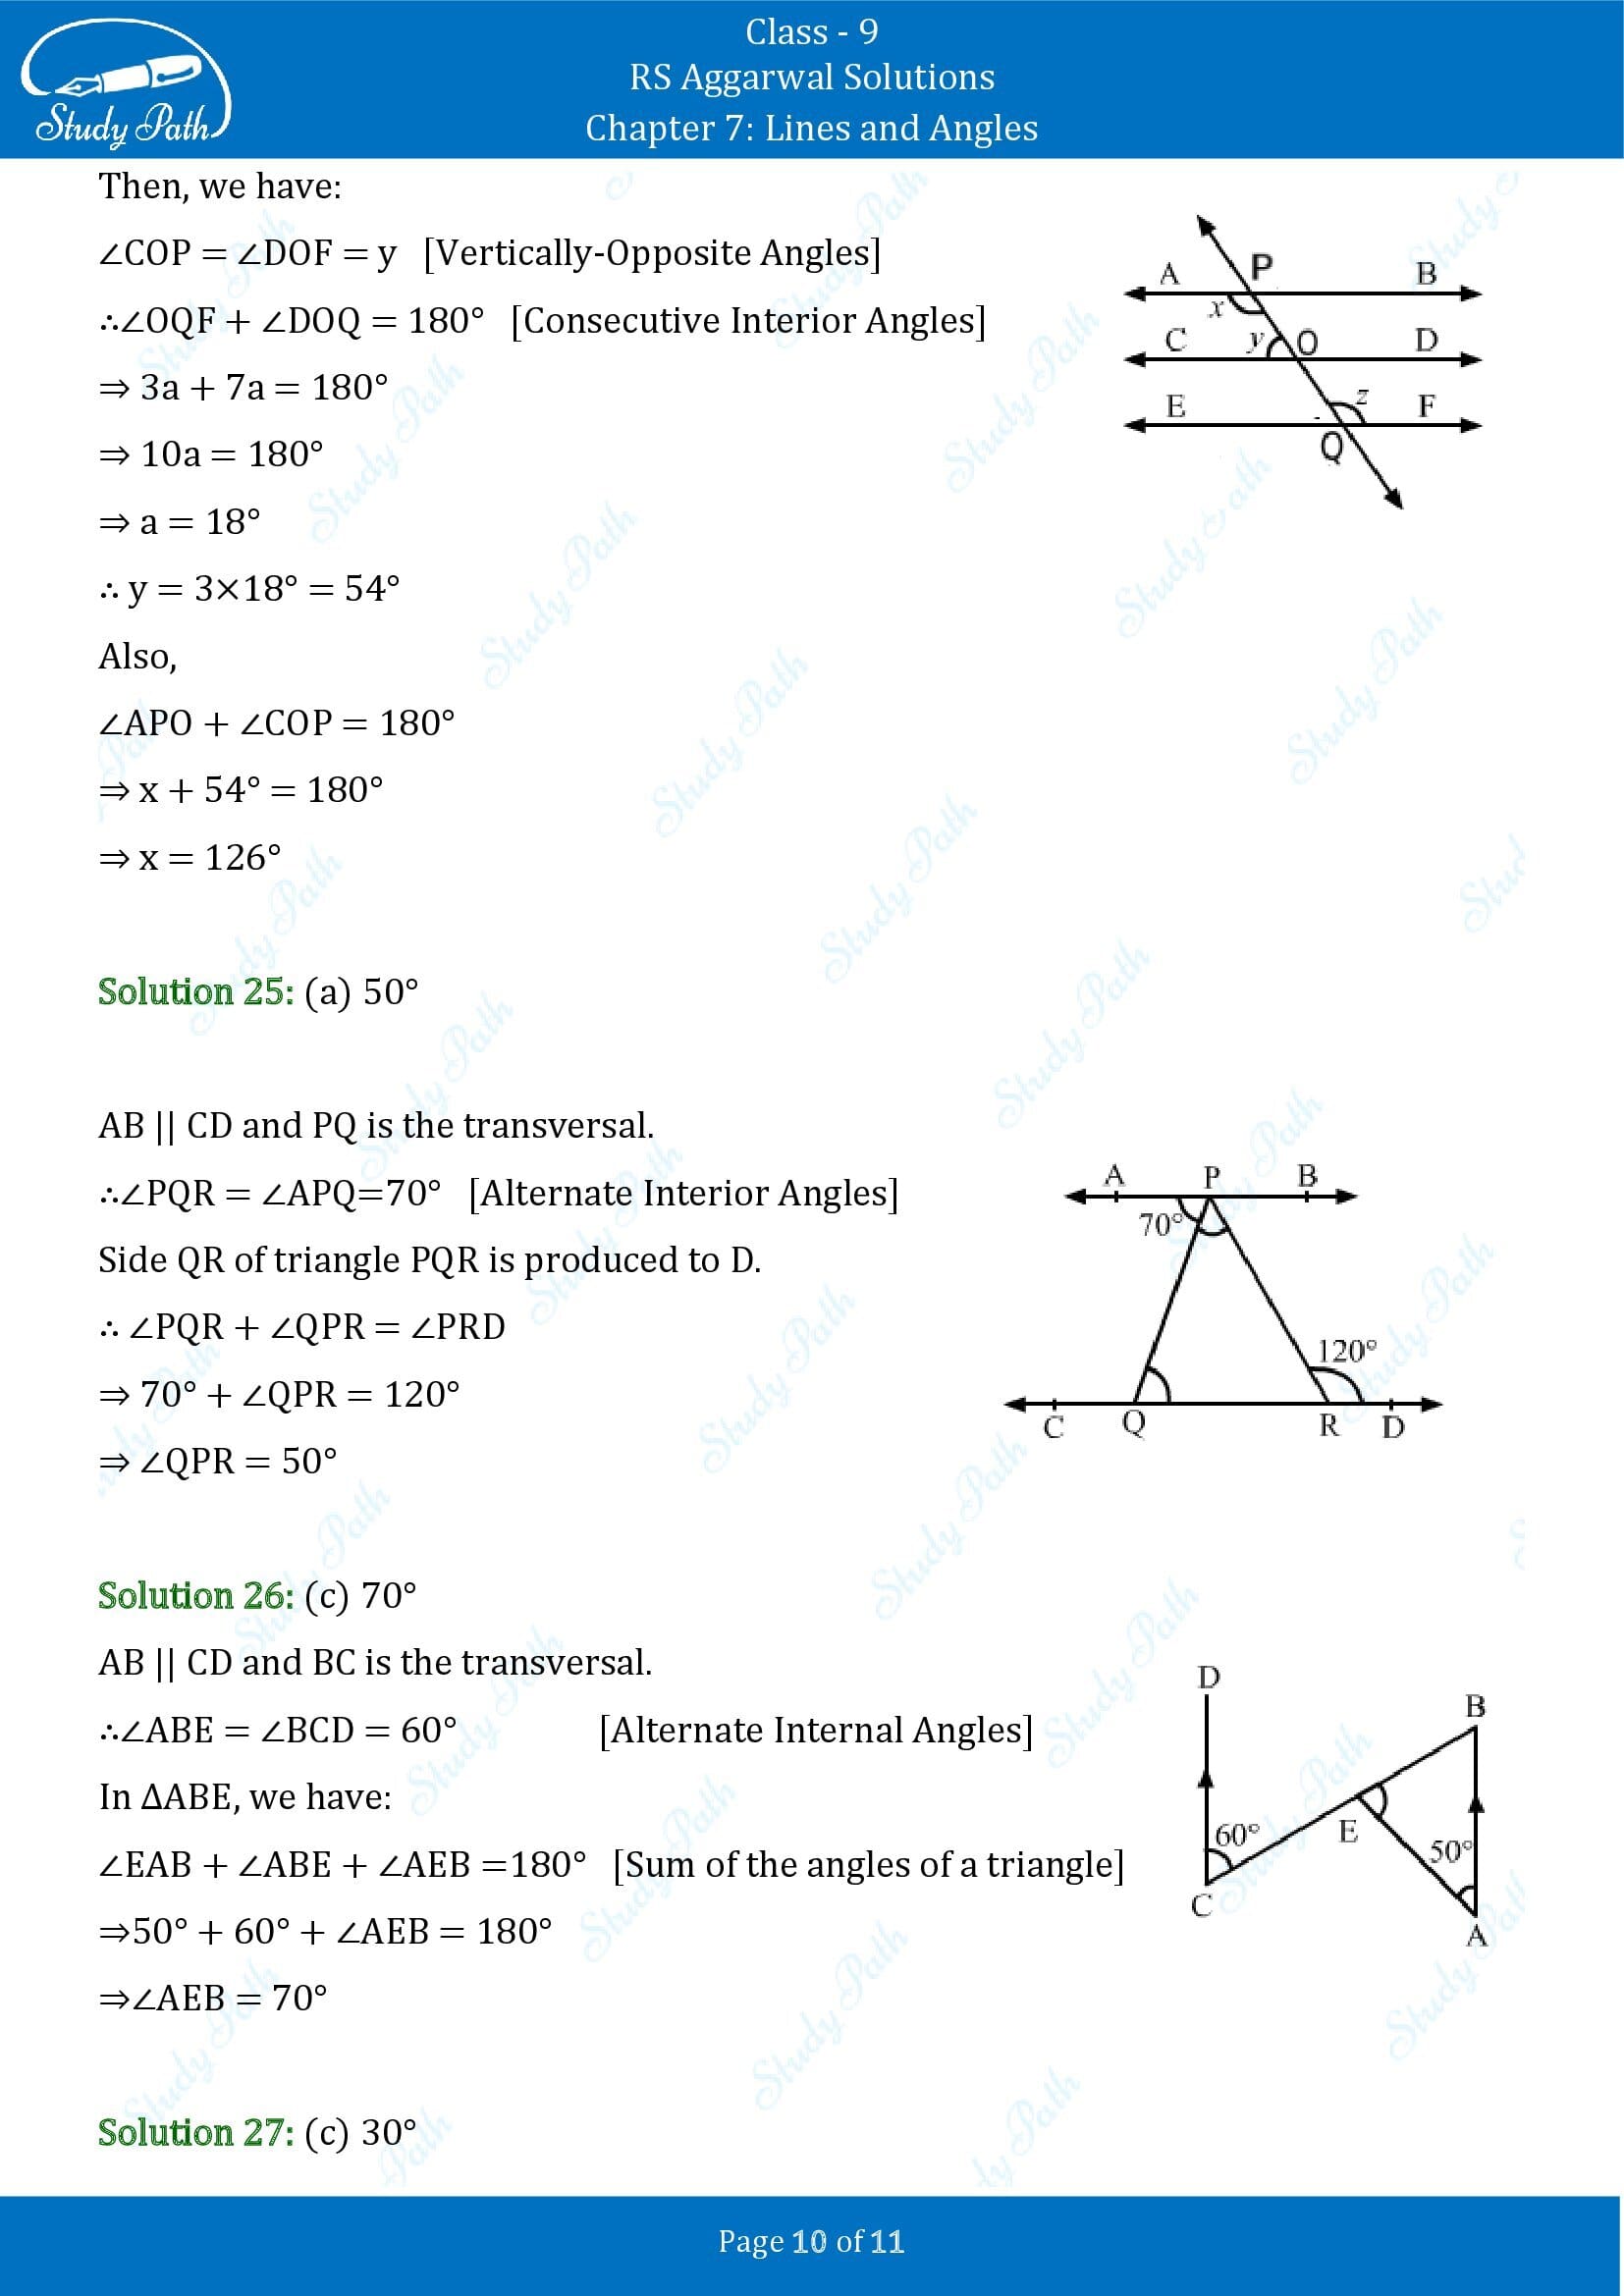 RS Aggarwal Solutions Class 9 Chapter 7 Lines and Angles Multiple Choice Questions MCQs 00010